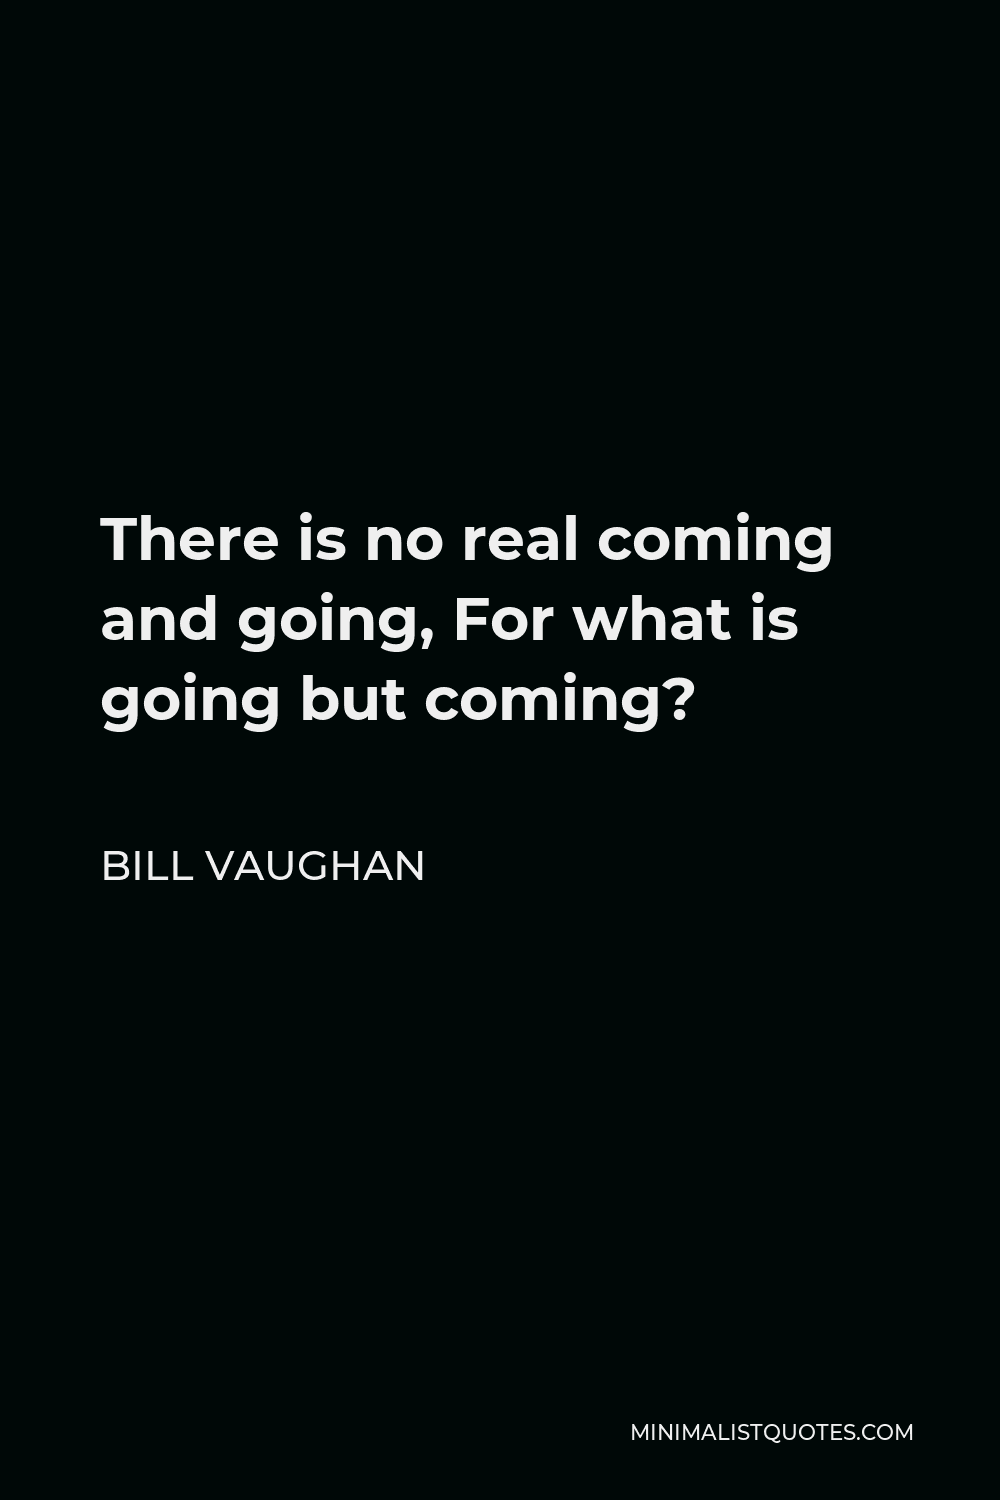 Bill Vaughan Quote - There is no real coming and going, For what is going but coming?